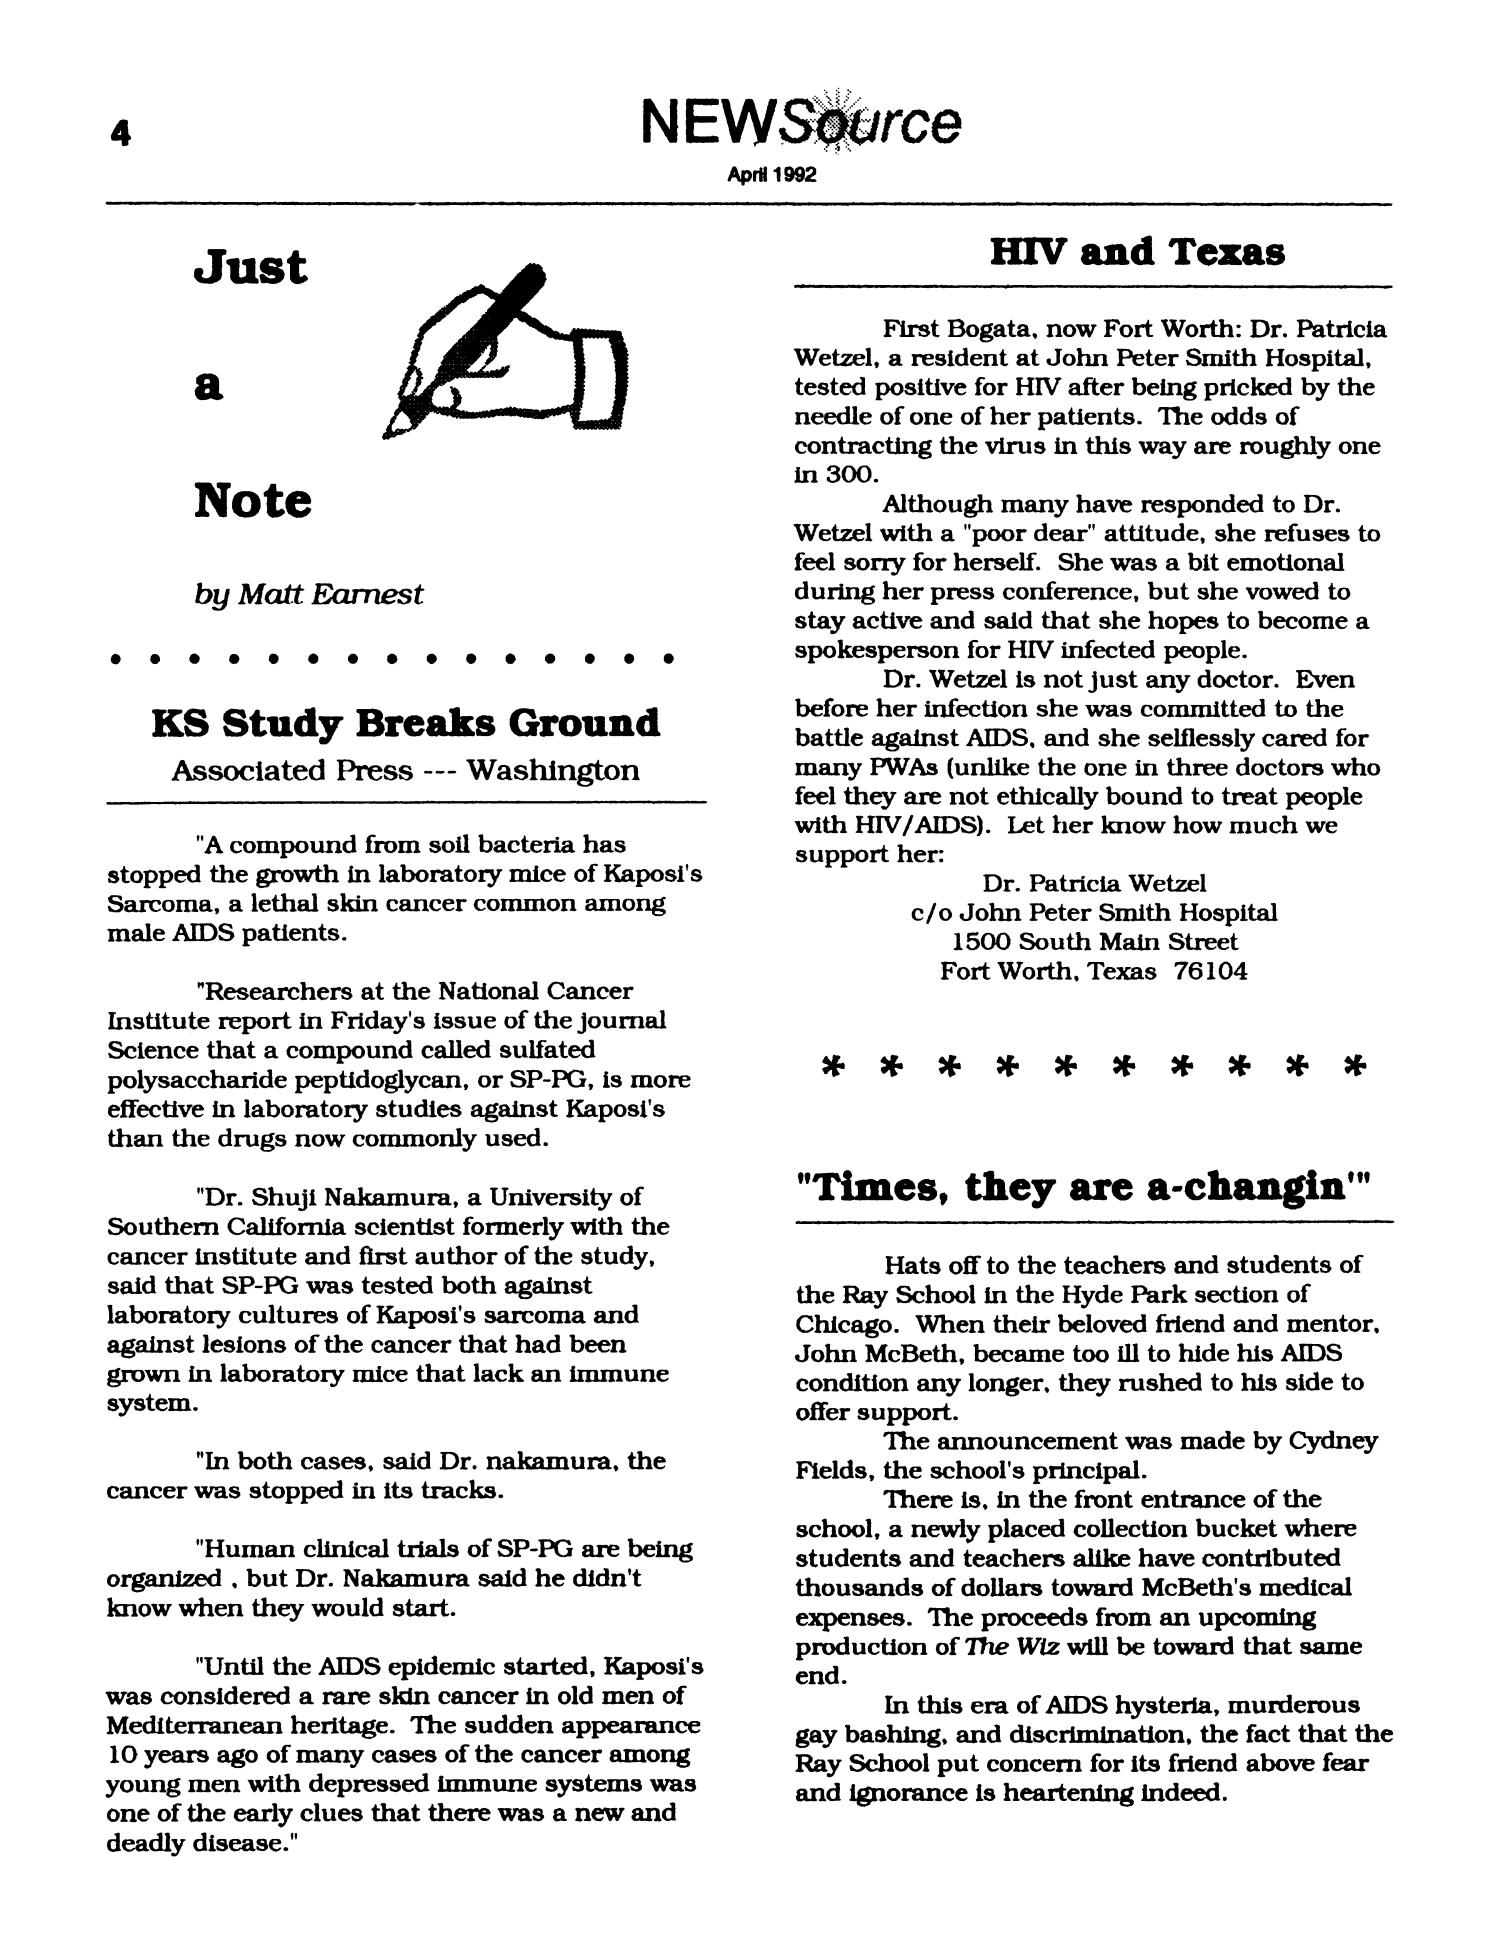 NEW Source, Issue 8, April 1992
                                                
                                                    4
                                                